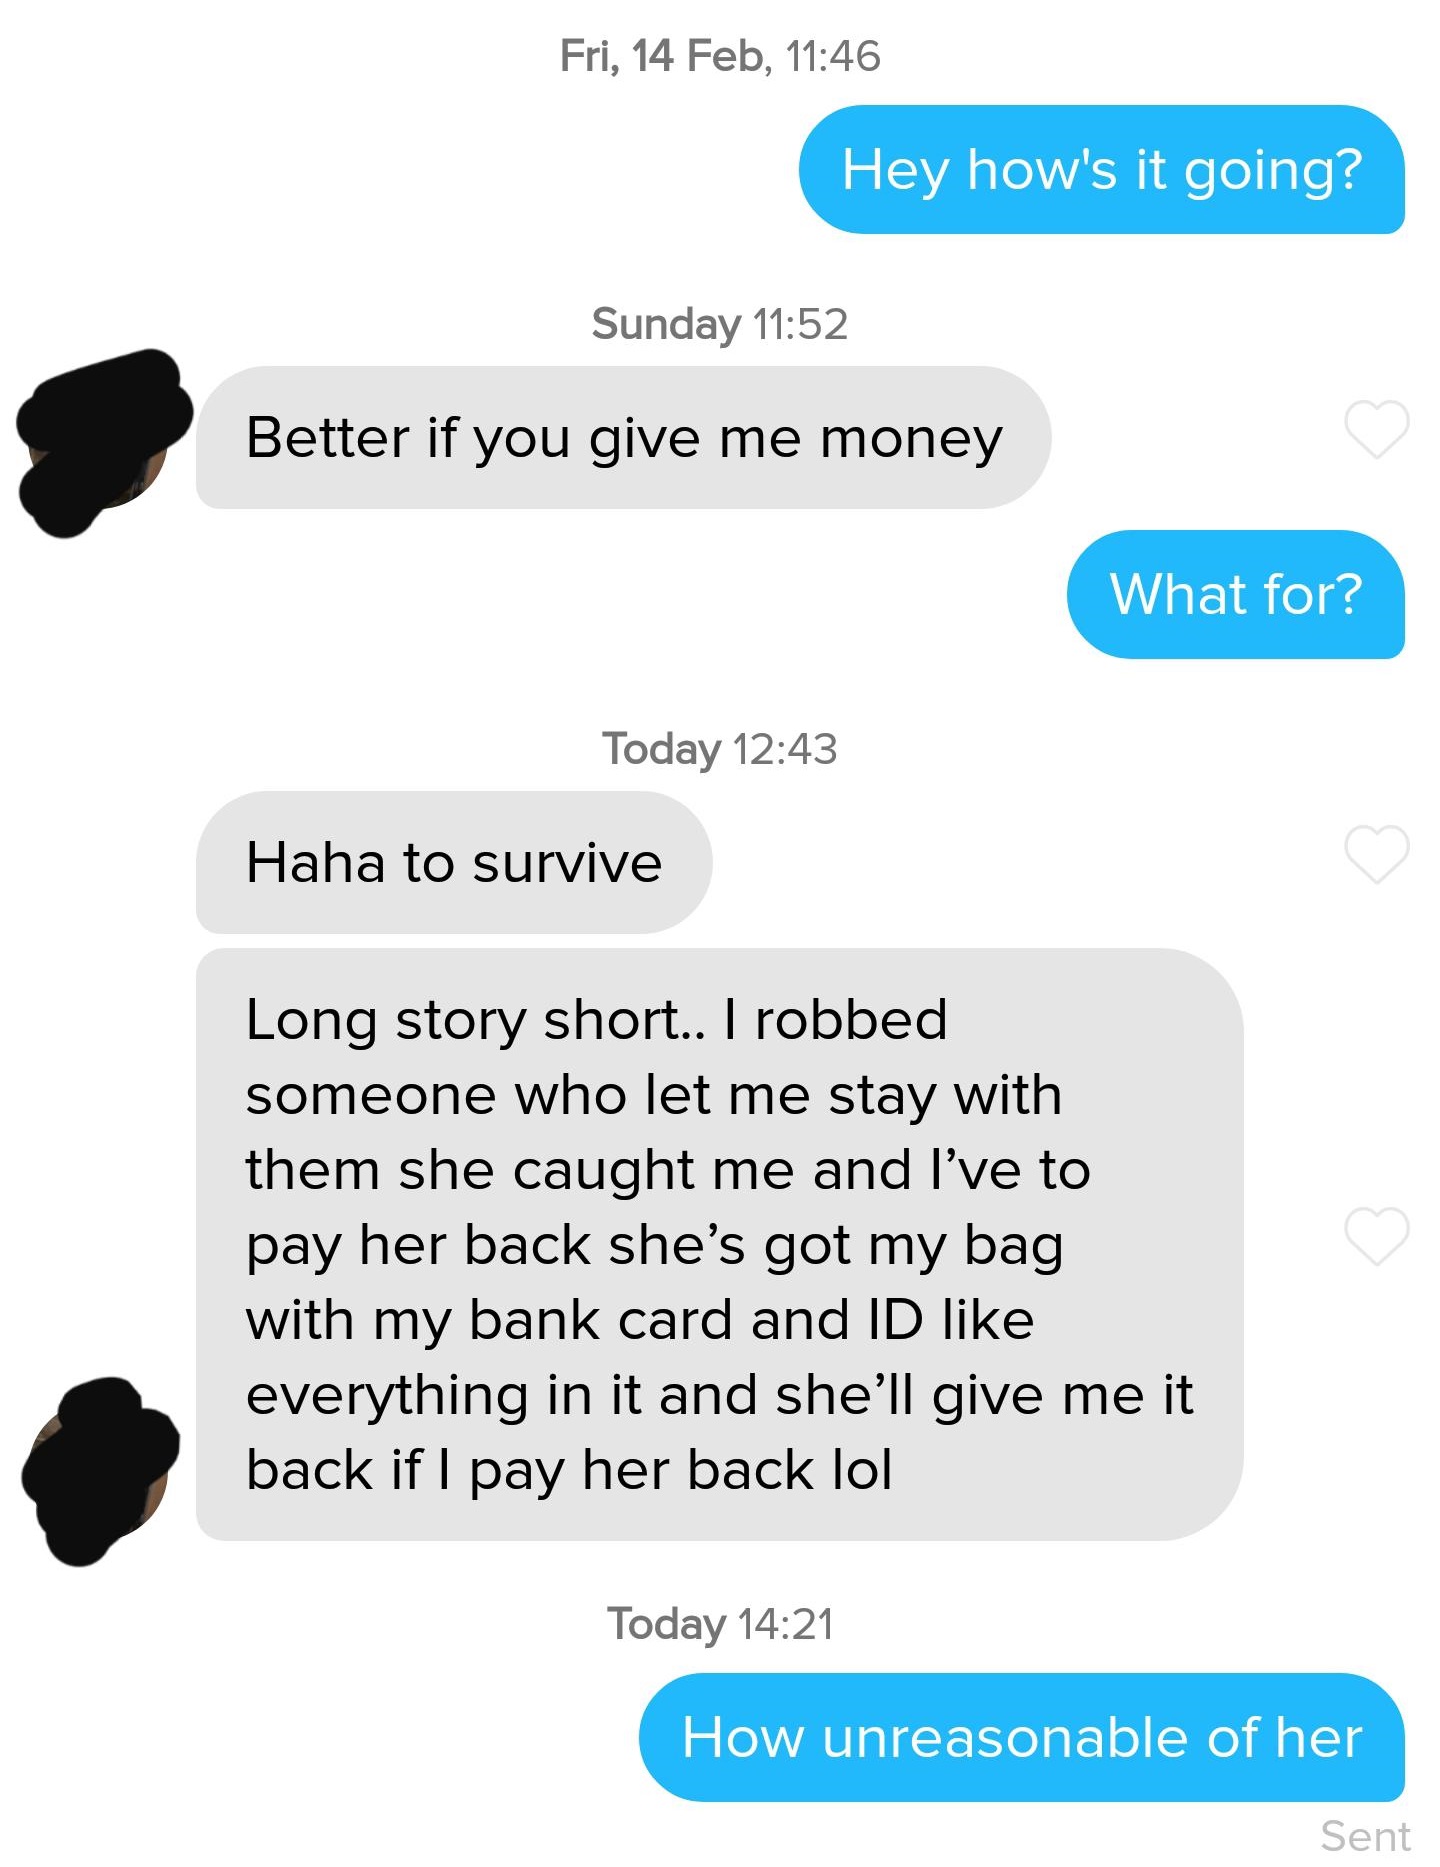 communication - Fri, 14 Feb, Hey how's it going? Sunday Better if you give me money What for? Today Haha to survive Long story short.. I robbed someone who let me stay with them she caught me and I've to pay her back she's got my bag with my bank card and